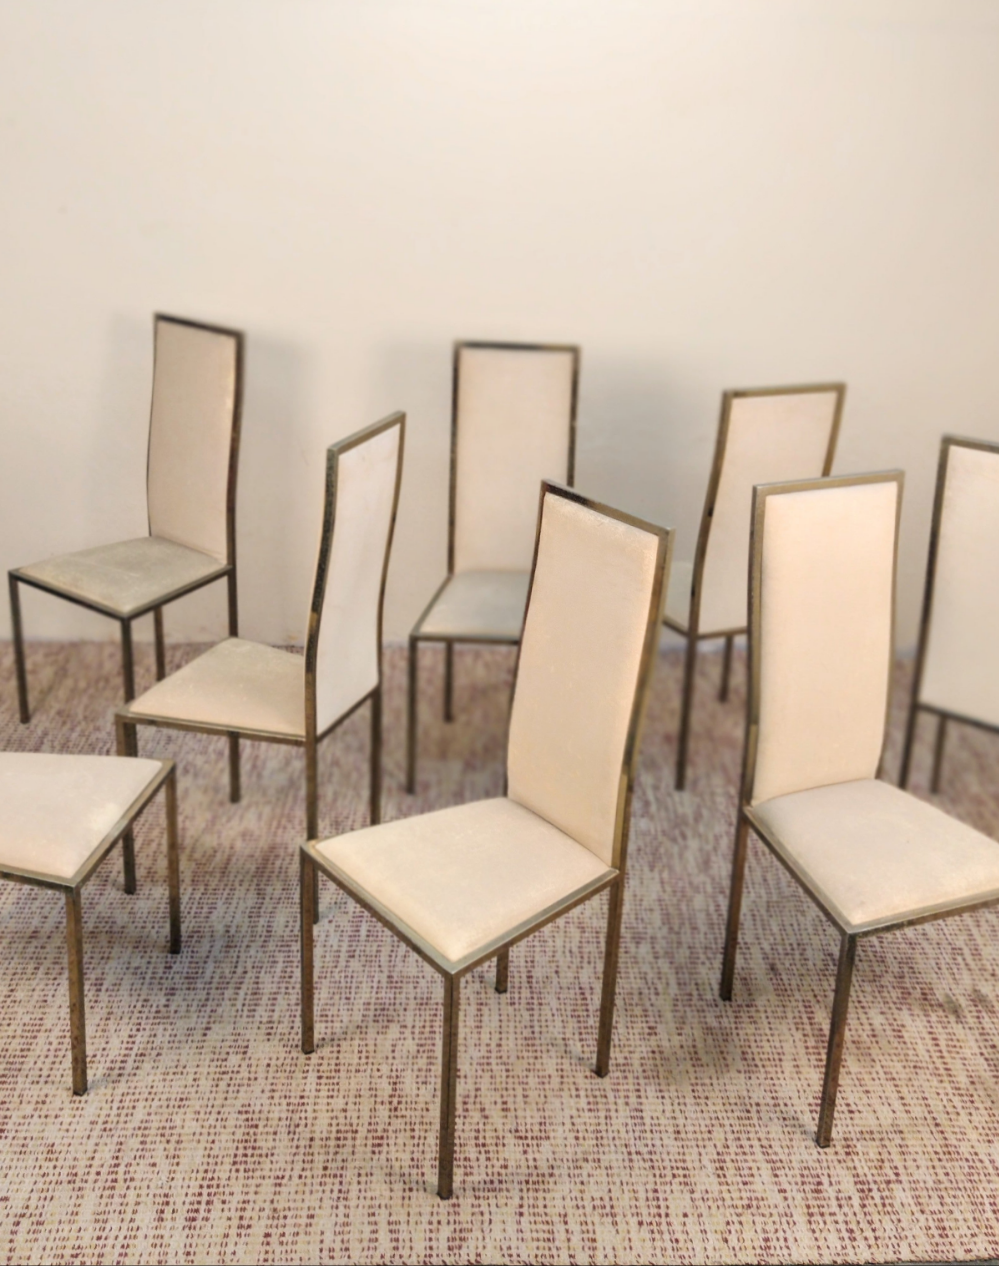 Octet of chairs from the 80s in gold metal and suede